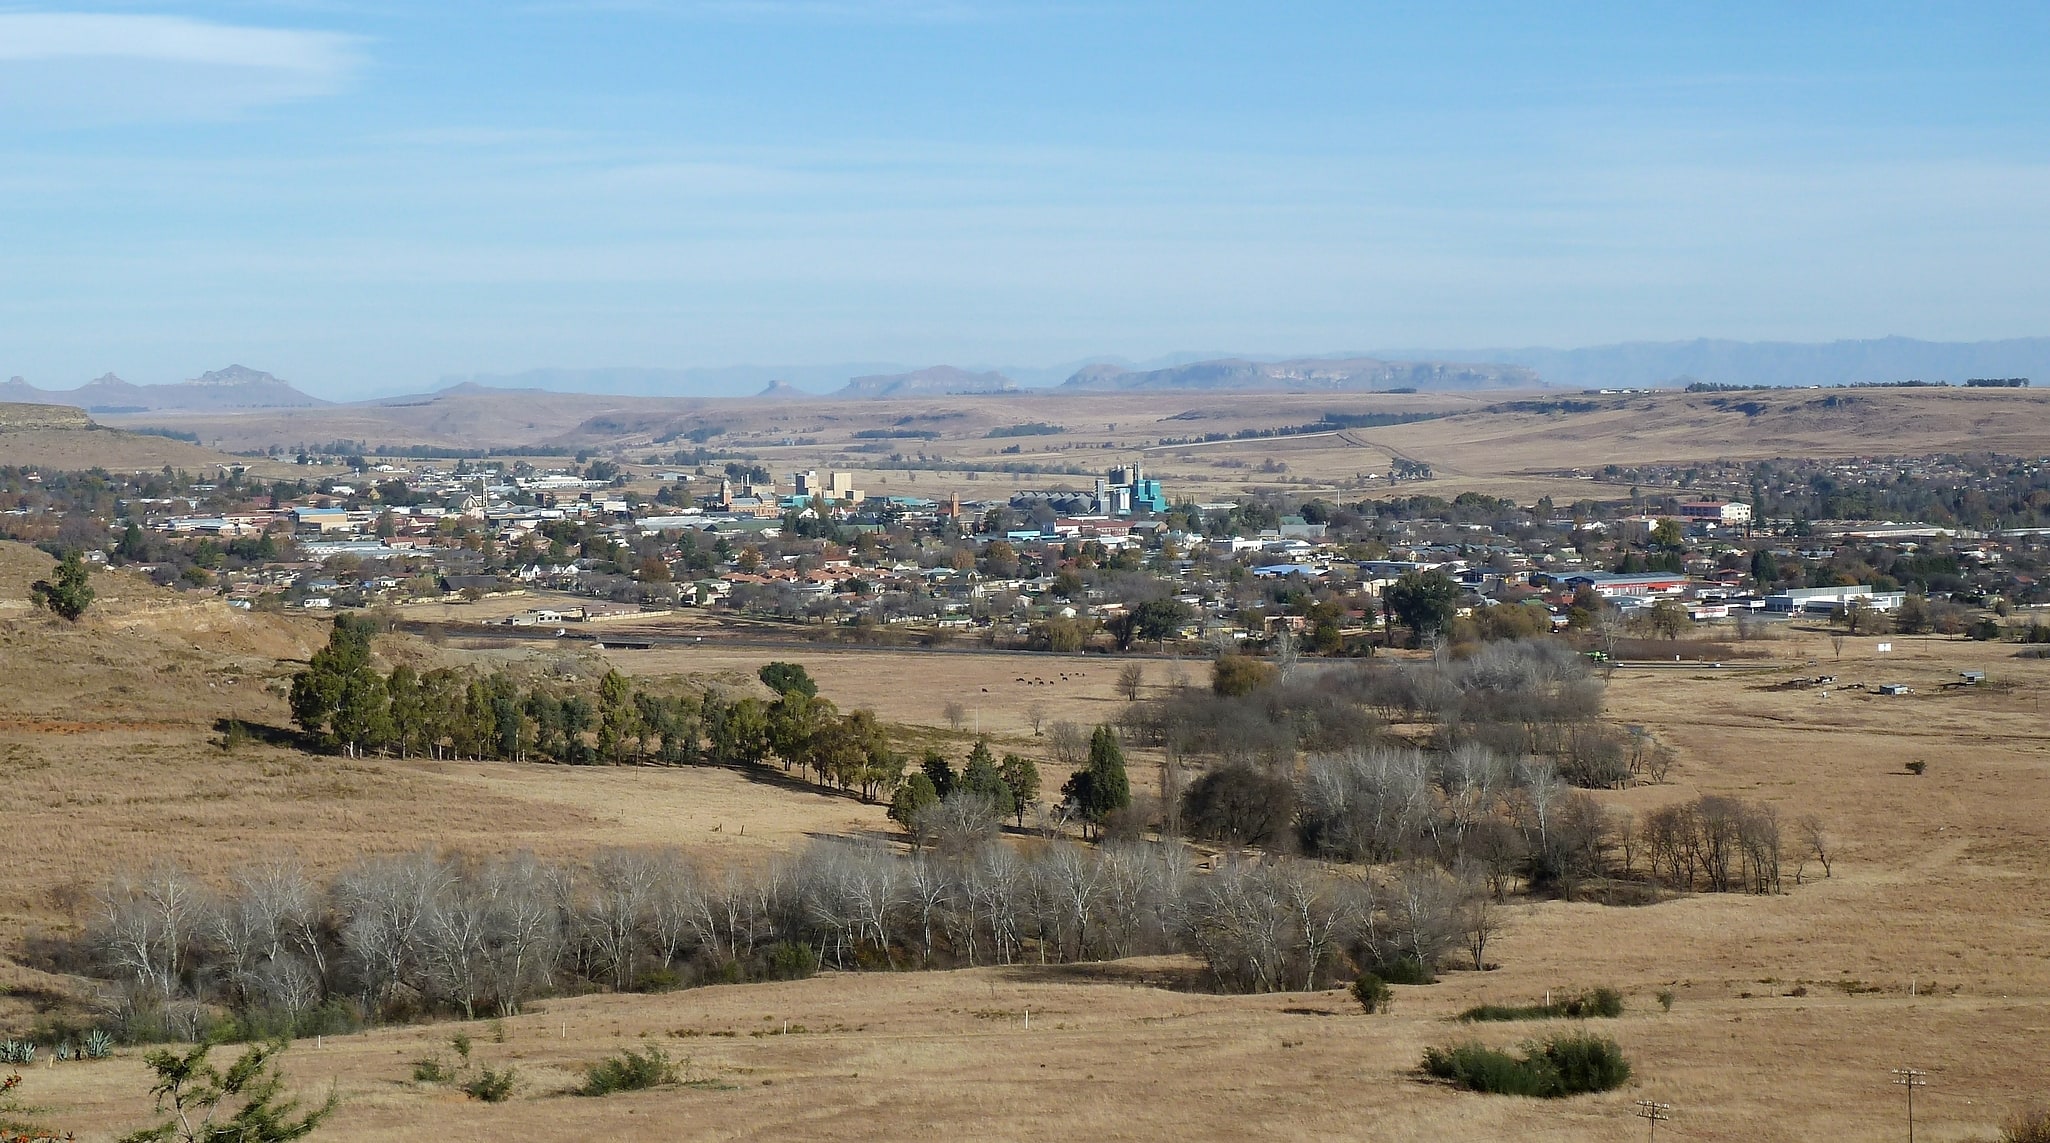 Harrismith, South Africa